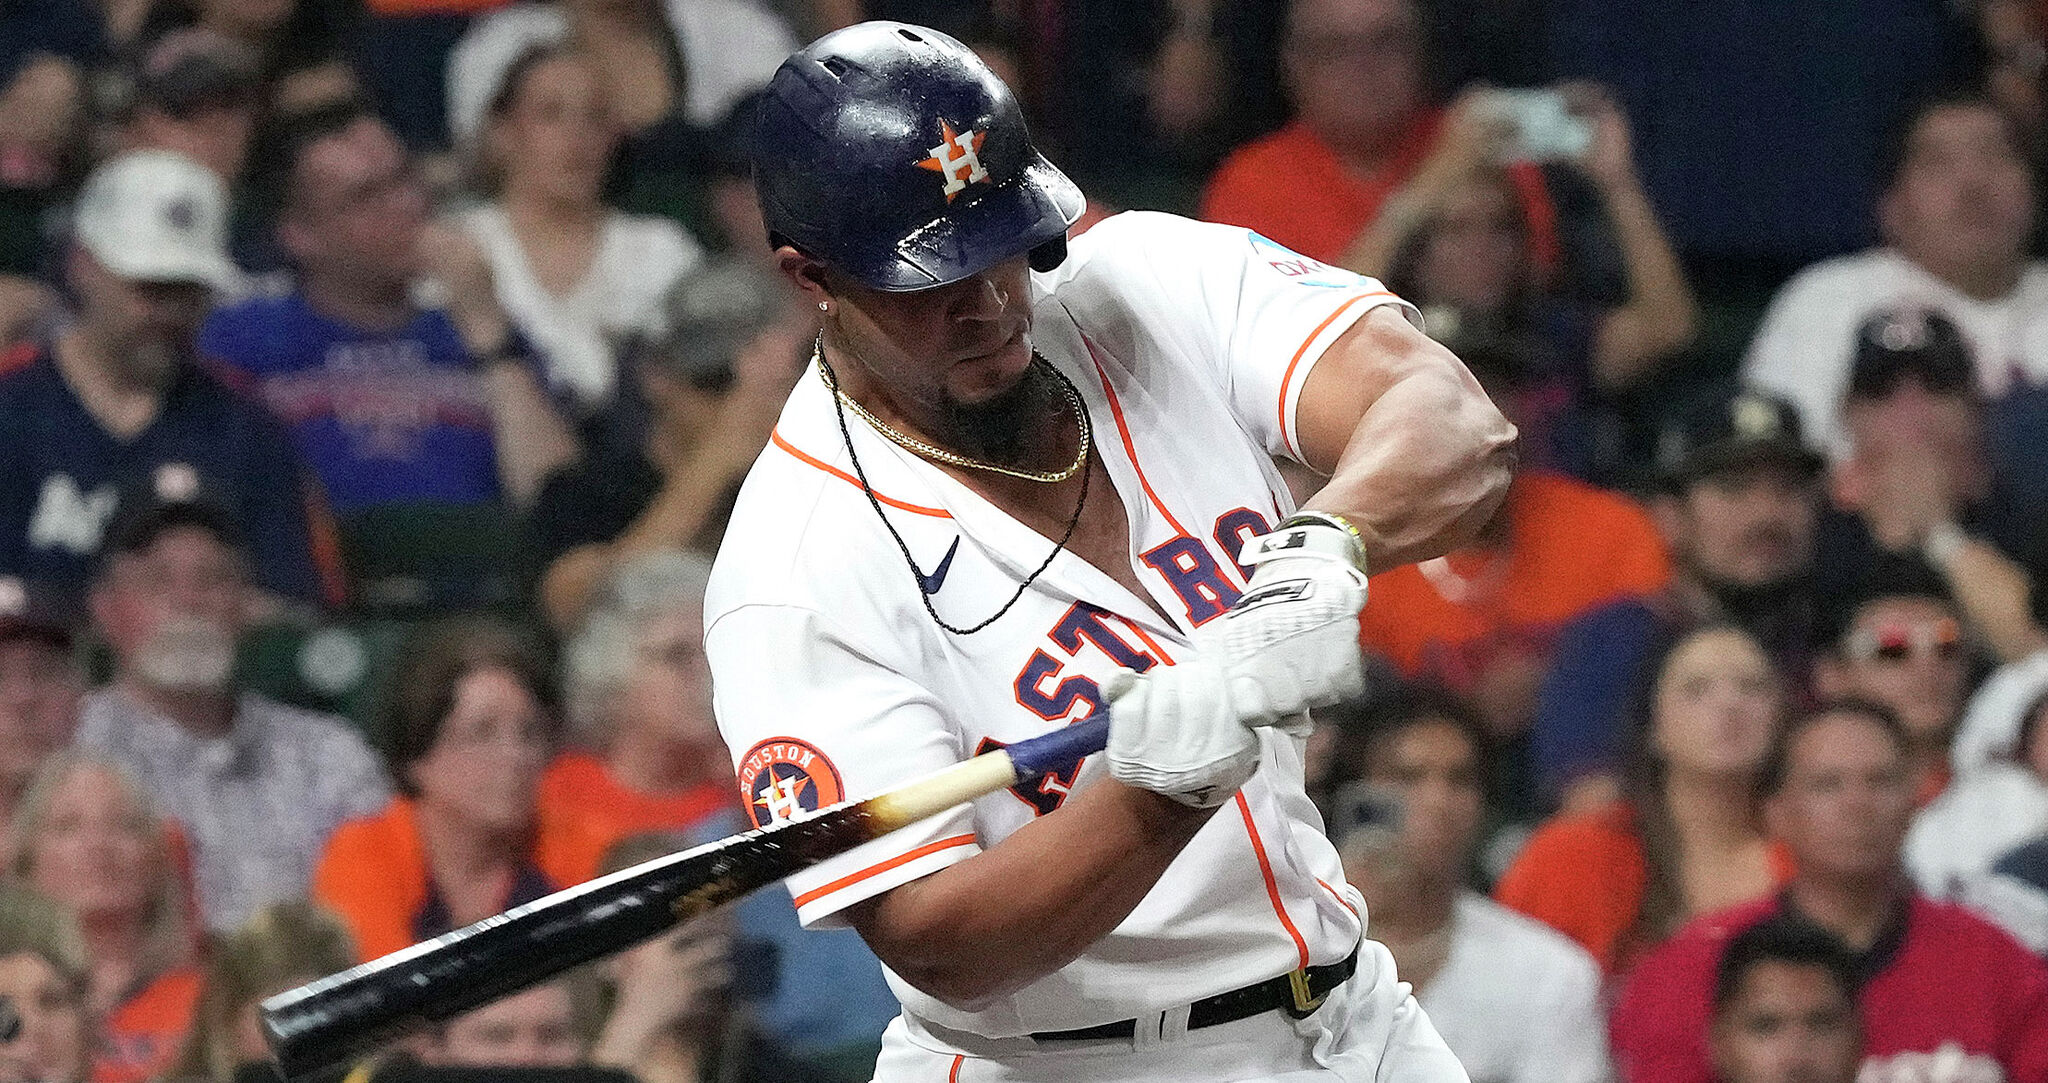 Jose Abreu batting in cleanup spot for Astros on Saturday